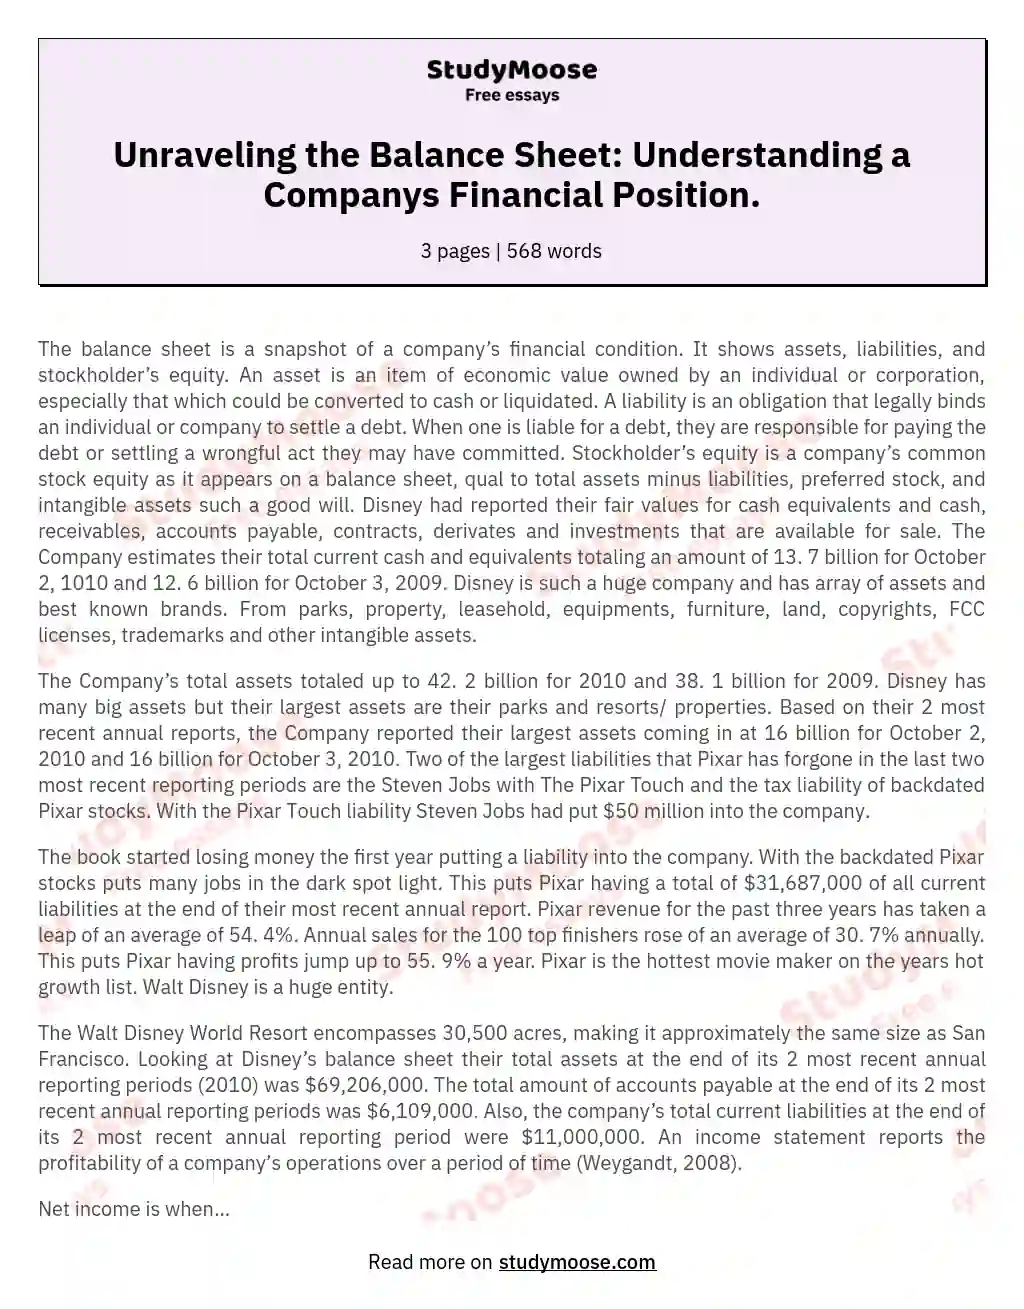 Unraveling the Balance Sheet: Understanding a Companys Financial Position. essay